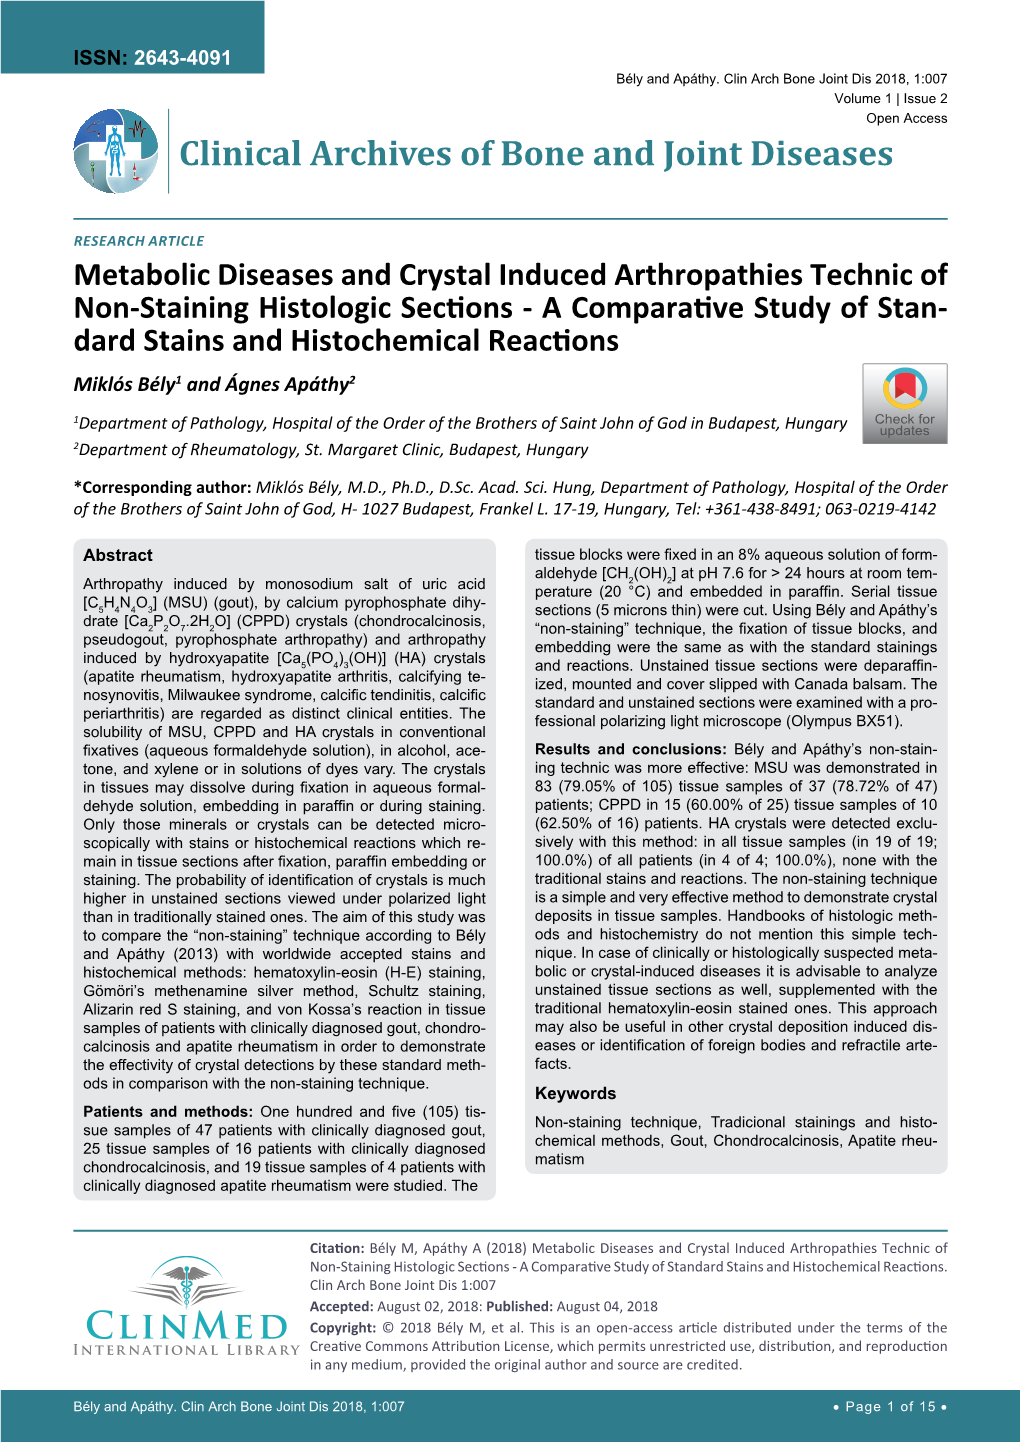 Metabolic Diseases and Crystal Induced Arthropathies Technic of Non-Staining Histologic Sections